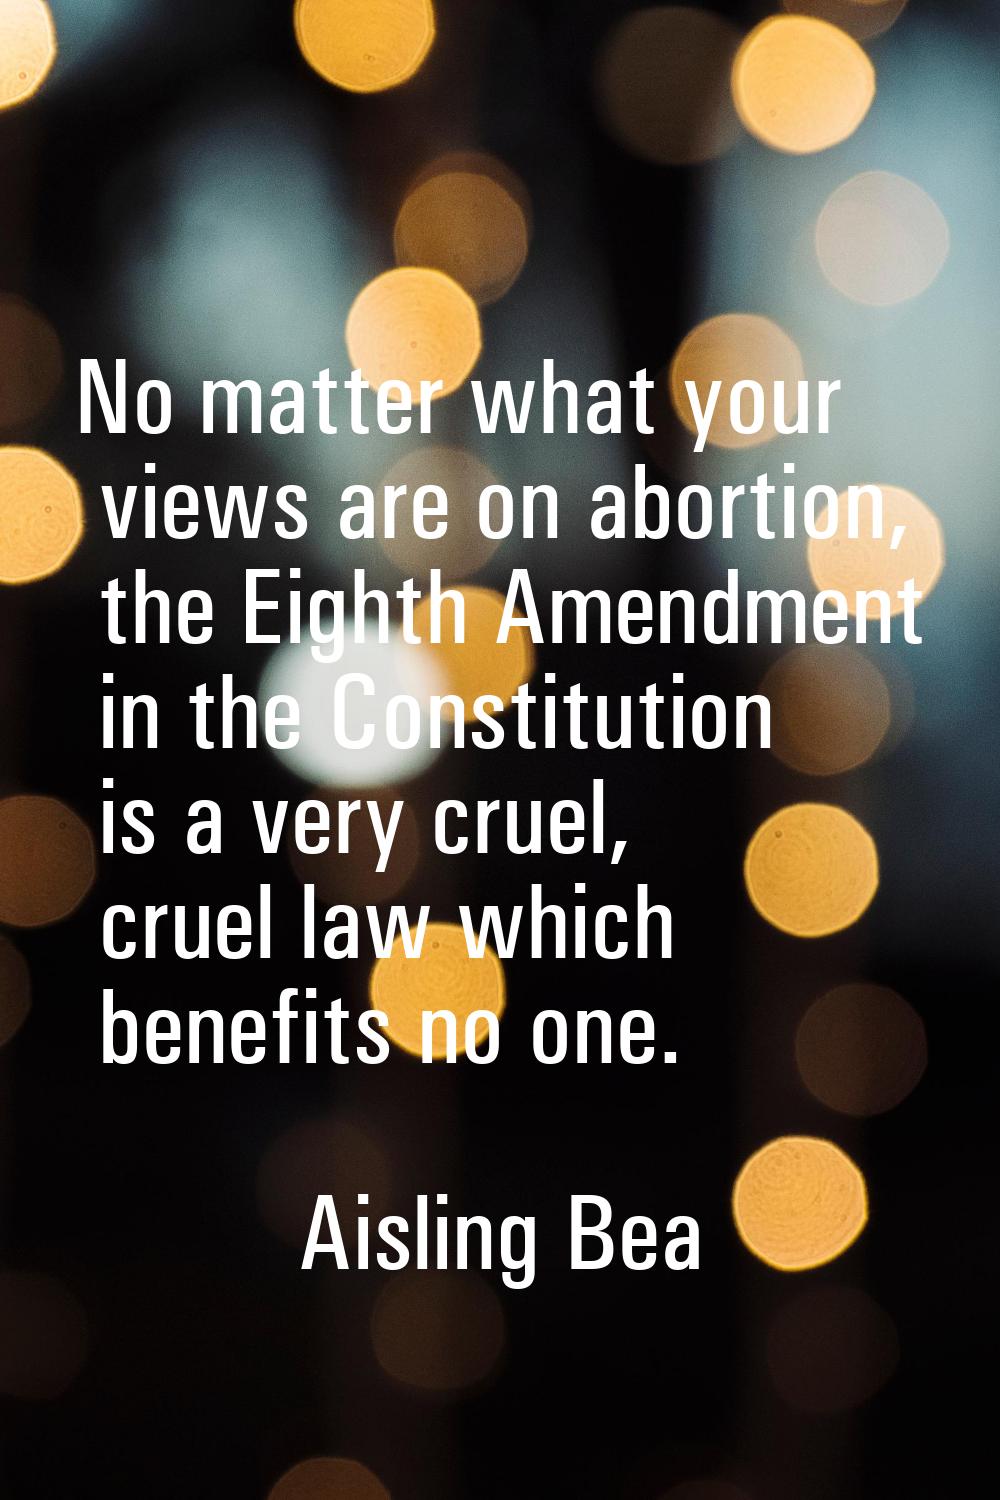 No matter what your views are on abortion, the Eighth Amendment in the Constitution is a very cruel